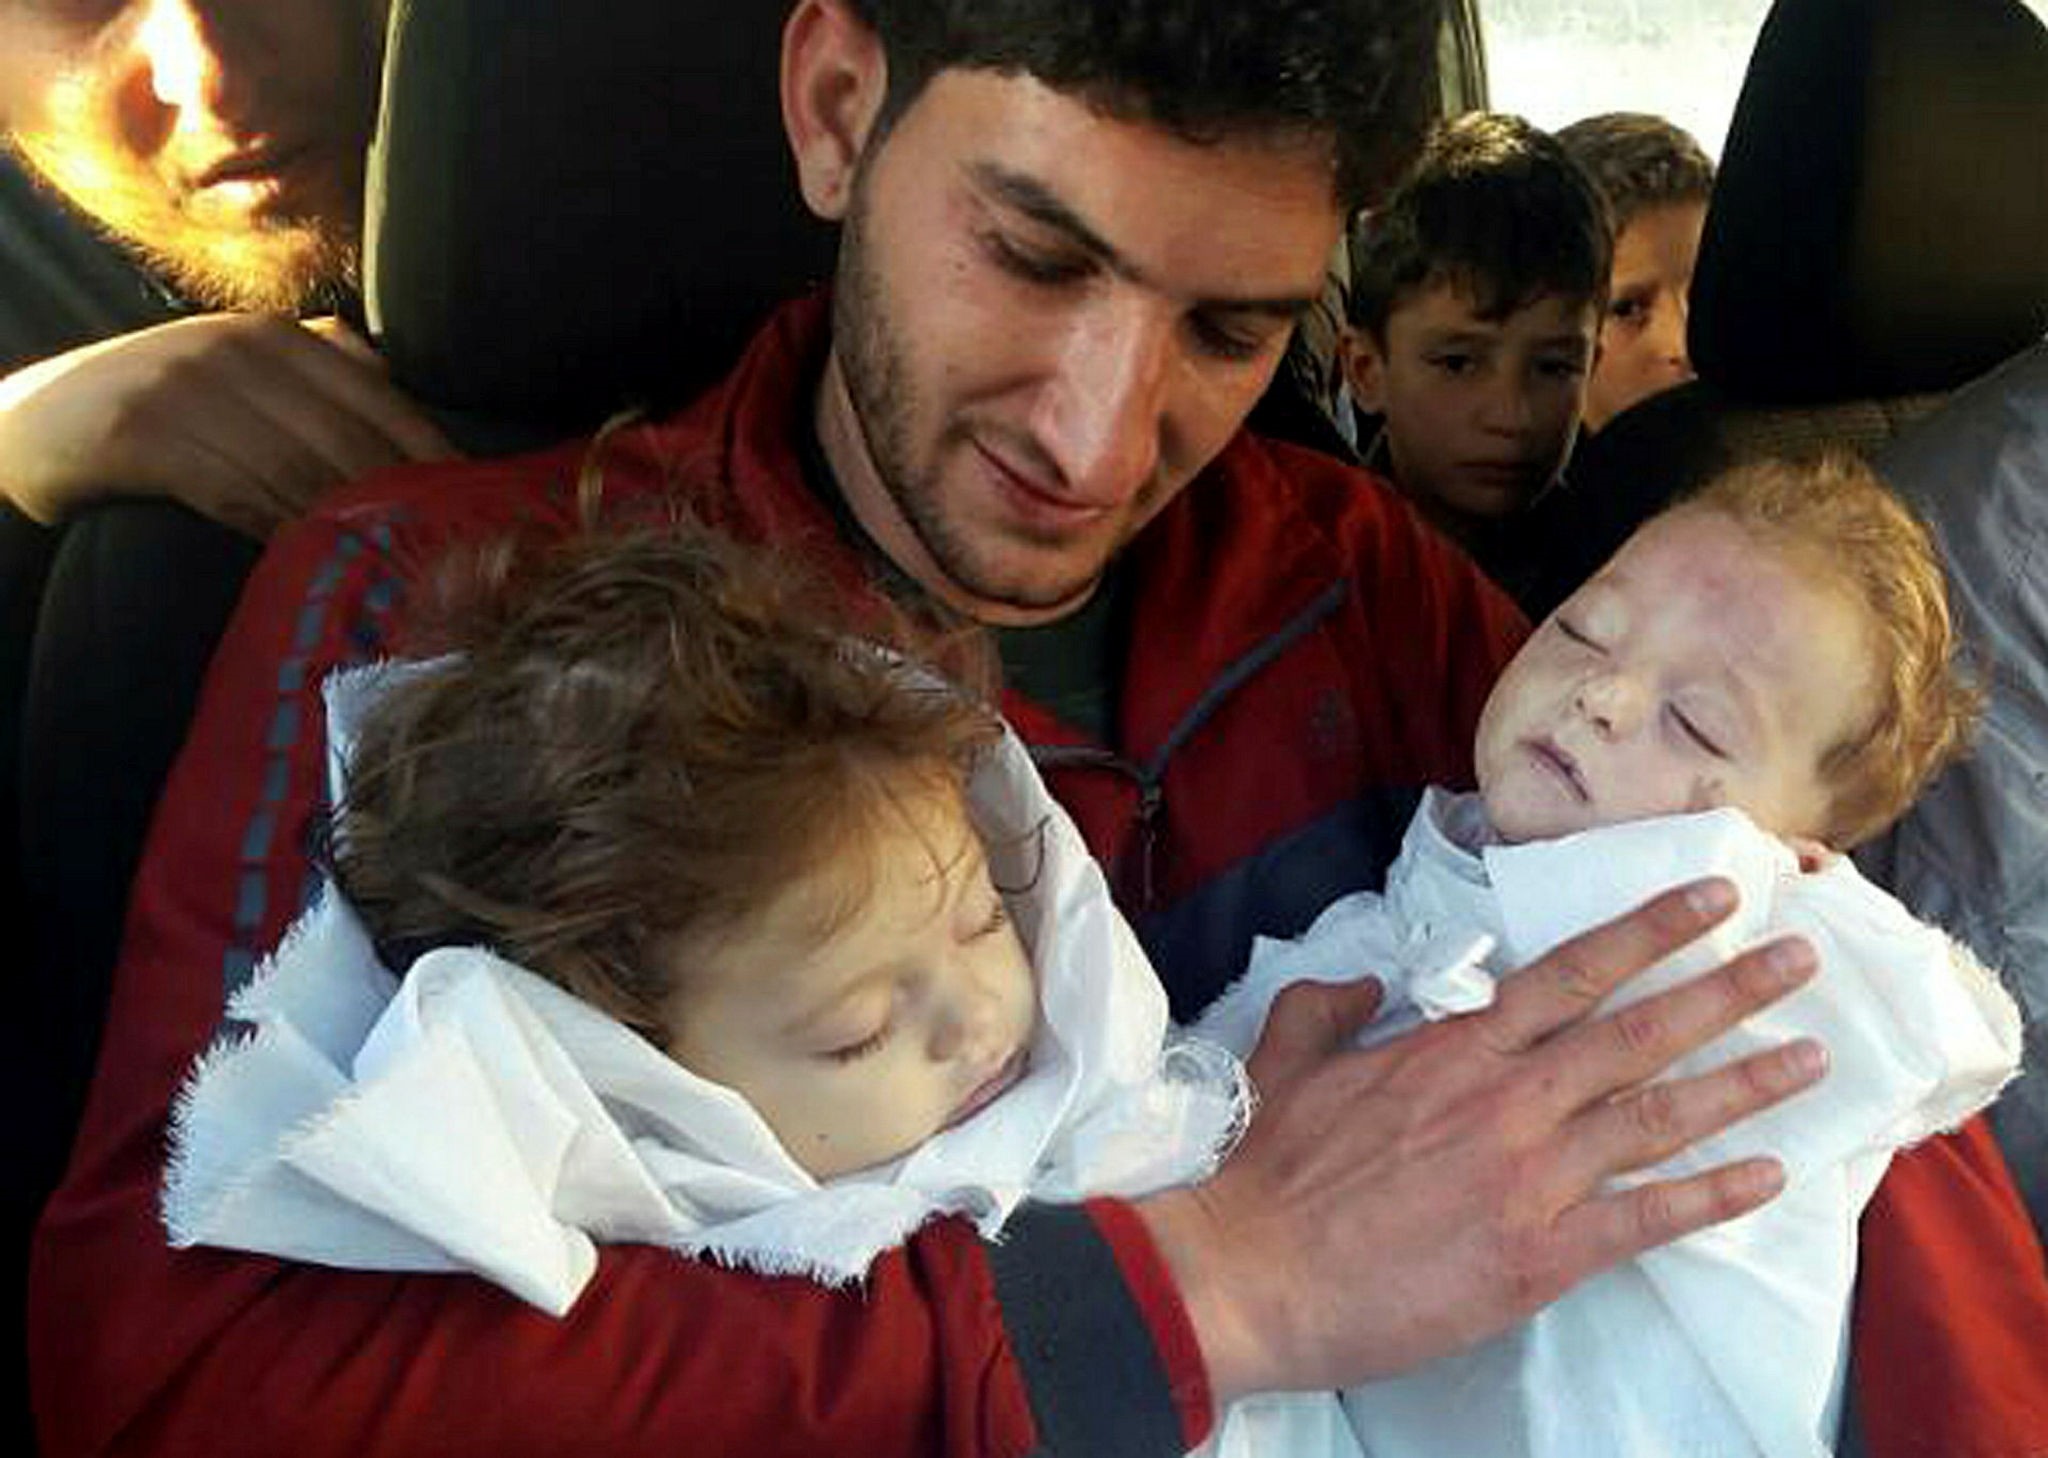 In this picture taken on Tuesday April 4, 2017, Abdul-Hamid Alyousef, 29, holds his twin babies who were killed during an Assad regime chemical weapons attack, in Khan Sheikhoun in the northern province of Idlib, Syria. (AP Photo)